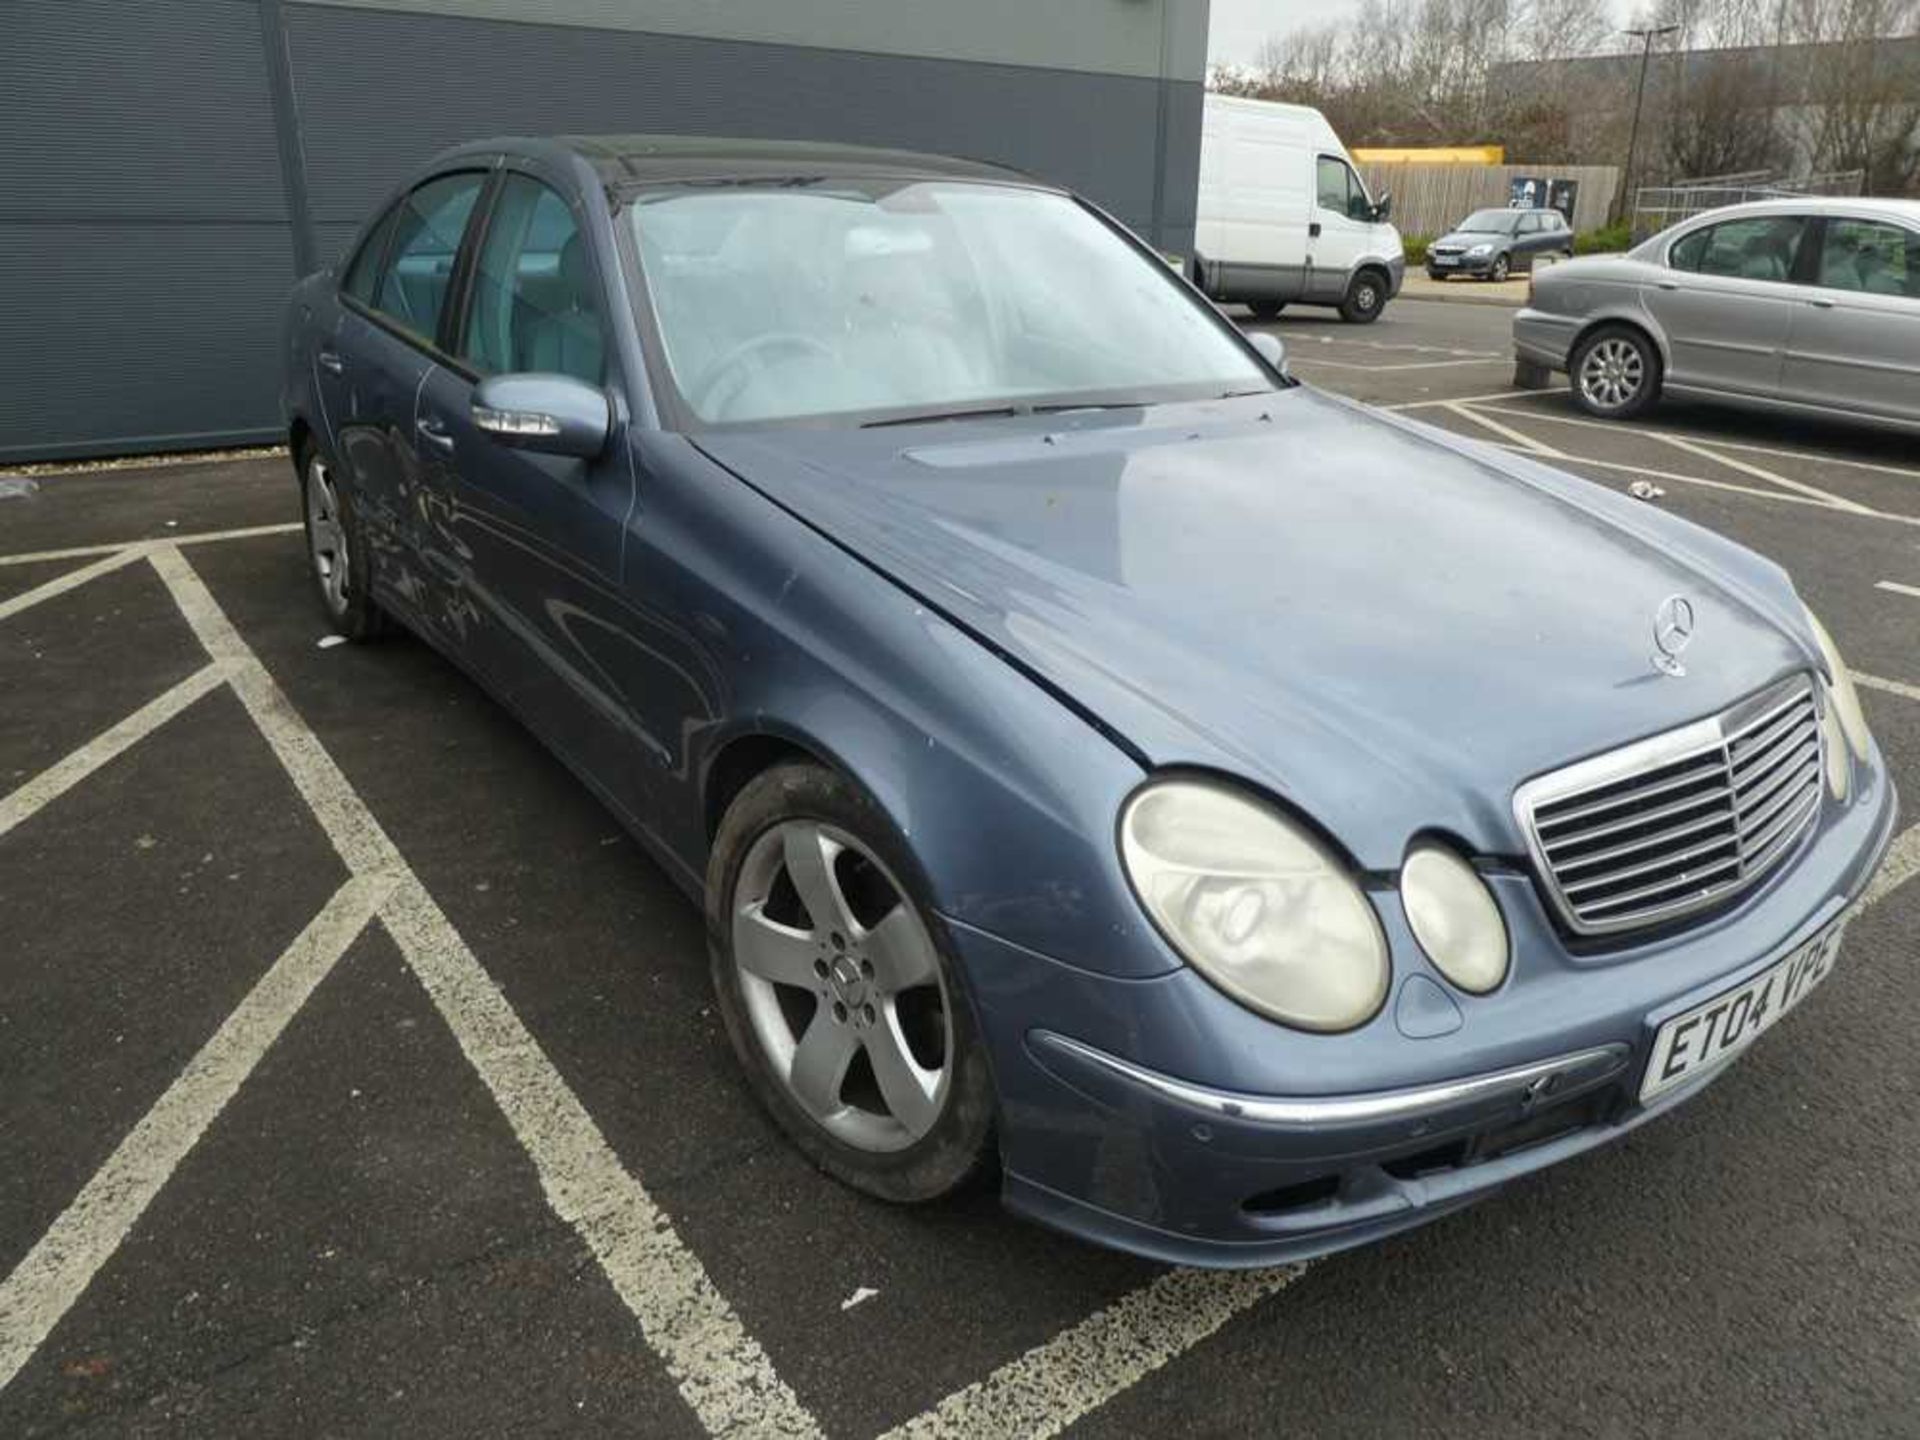 ET04 VPE (2004) Mercedes E240 Avantgarde Auto saloon, in blue, 2597cc, petrol, first registered 12/ - Image 3 of 14